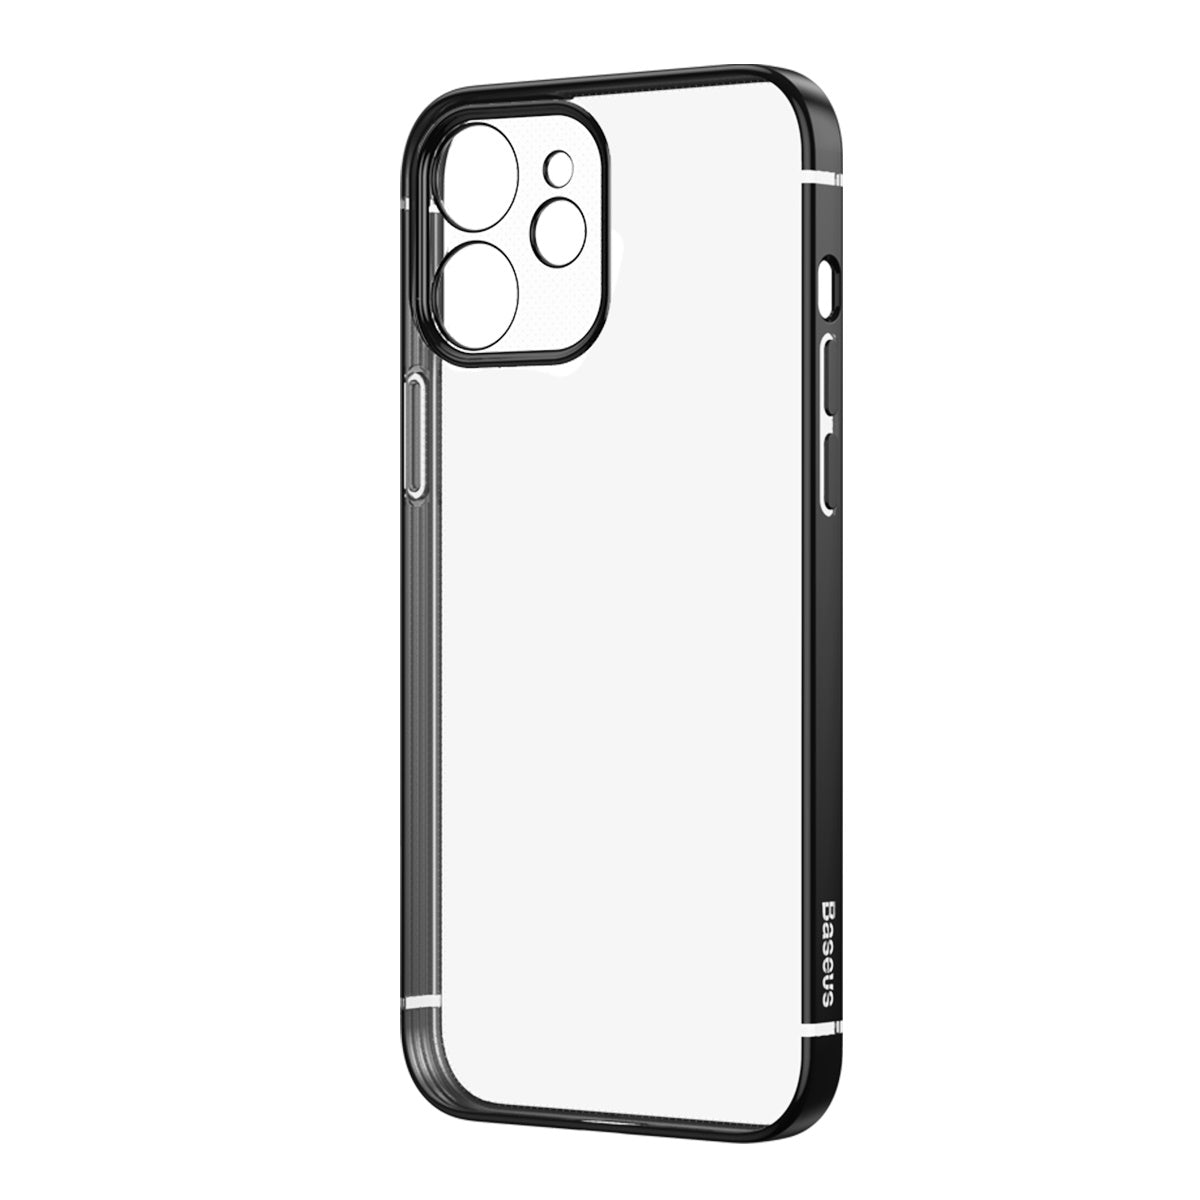 Baseus Shining Case for iPhone 12 6.1 inches 2020 (ARAPIPH61N-MD01)